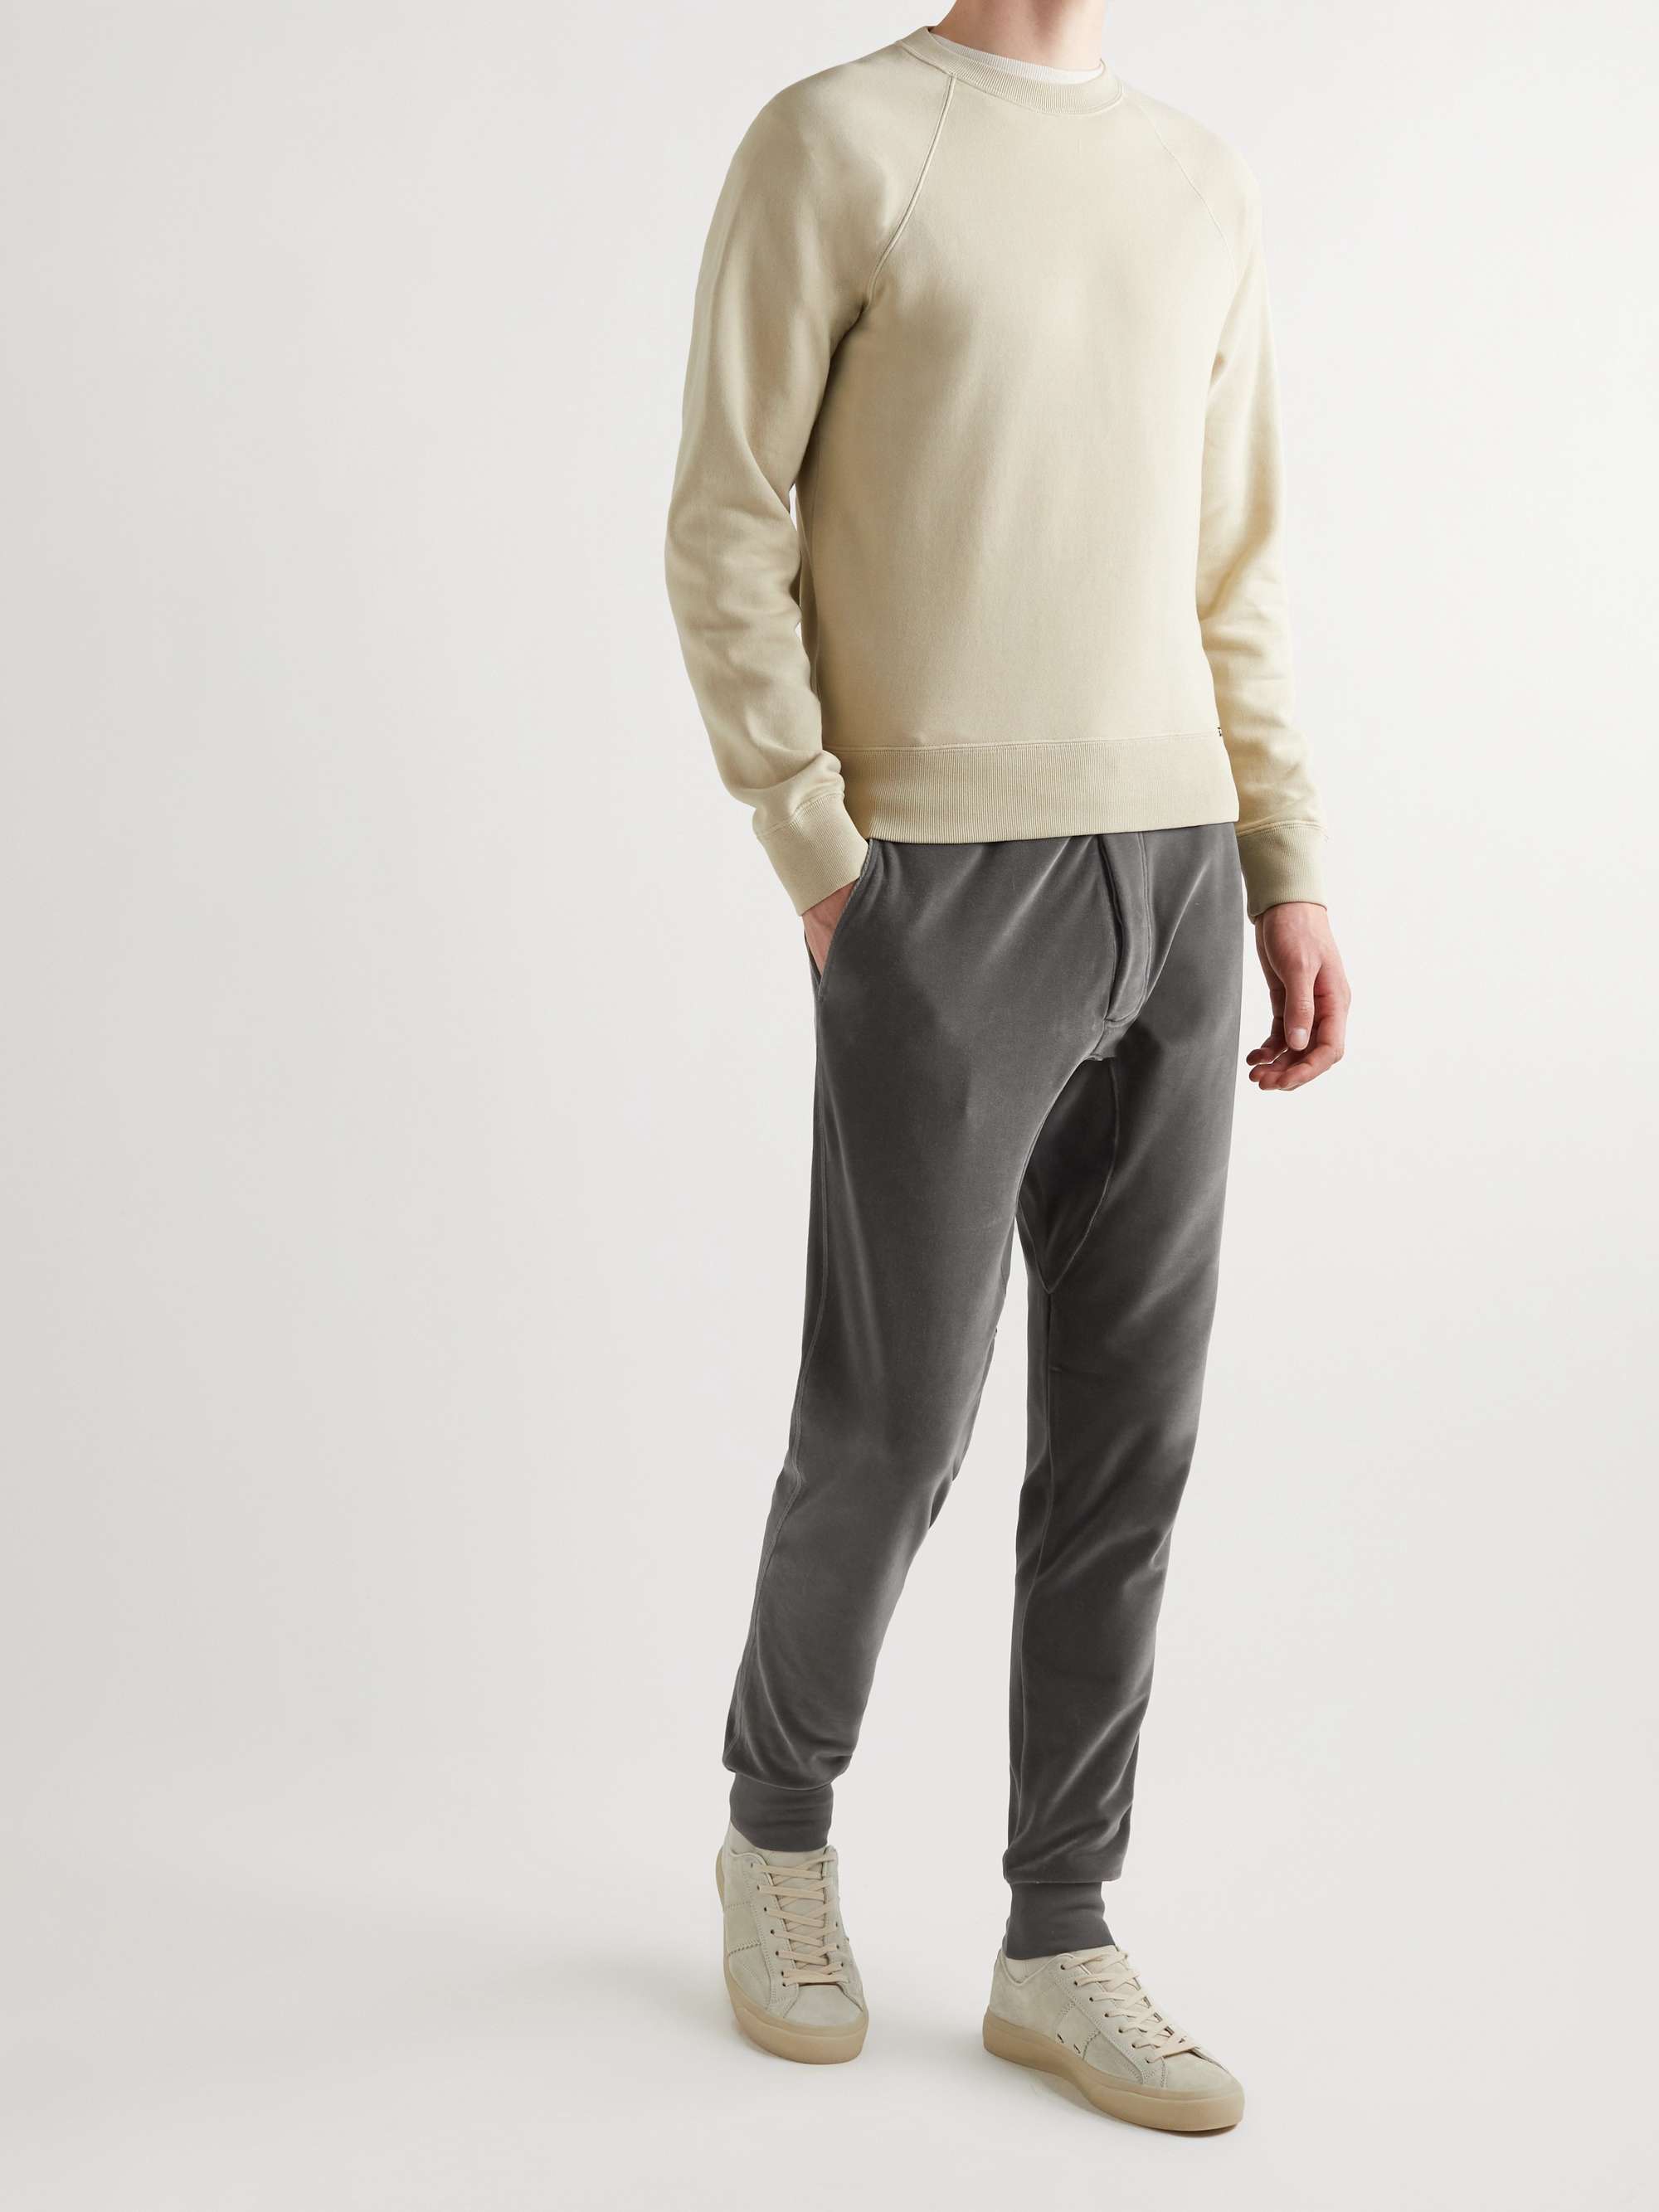 TOM FORD Tapered Cotton-Blend Velour Sweatpants